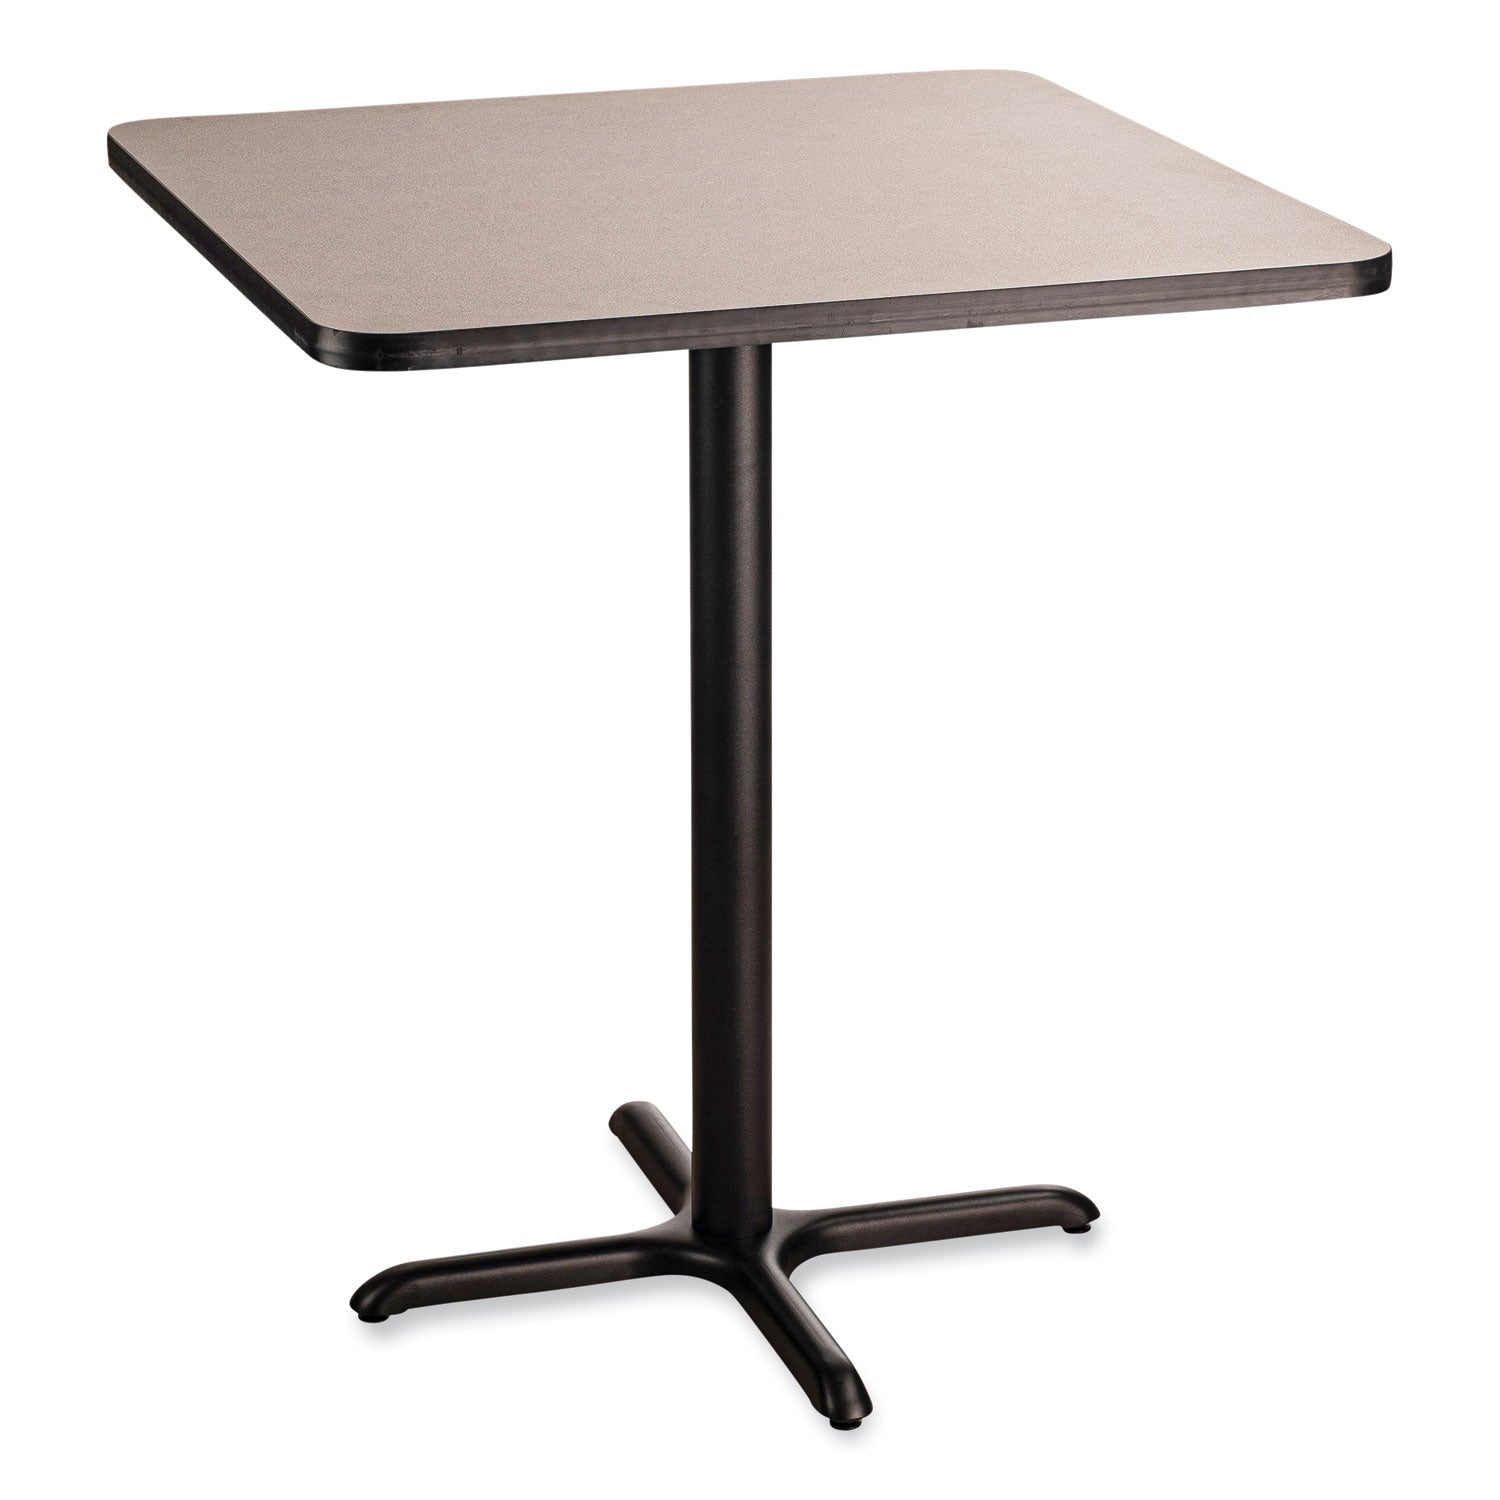 cafe-table-36w-x-36d-x-42h-square-top-x-base-gray-nebula-top-black-base-ships-in-7-10-business-days_npsct33636xb1gy - 1